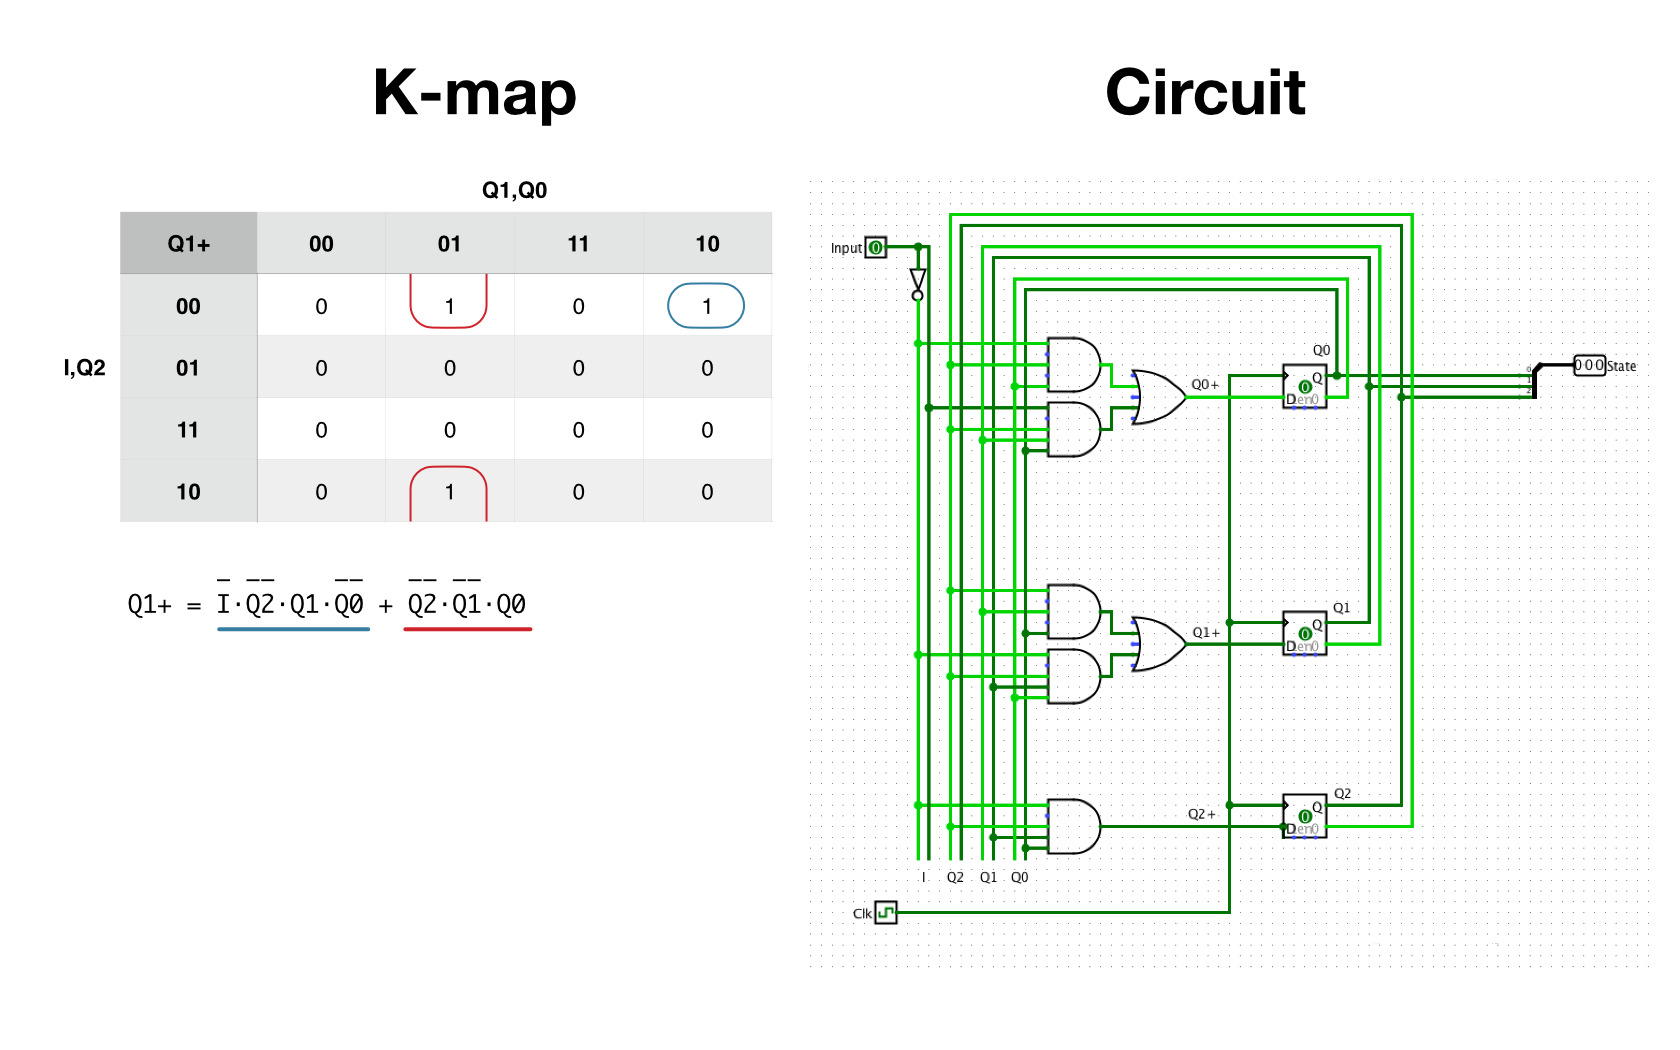 State Machine K-map, Boolean Expression, and Circuit Diagram